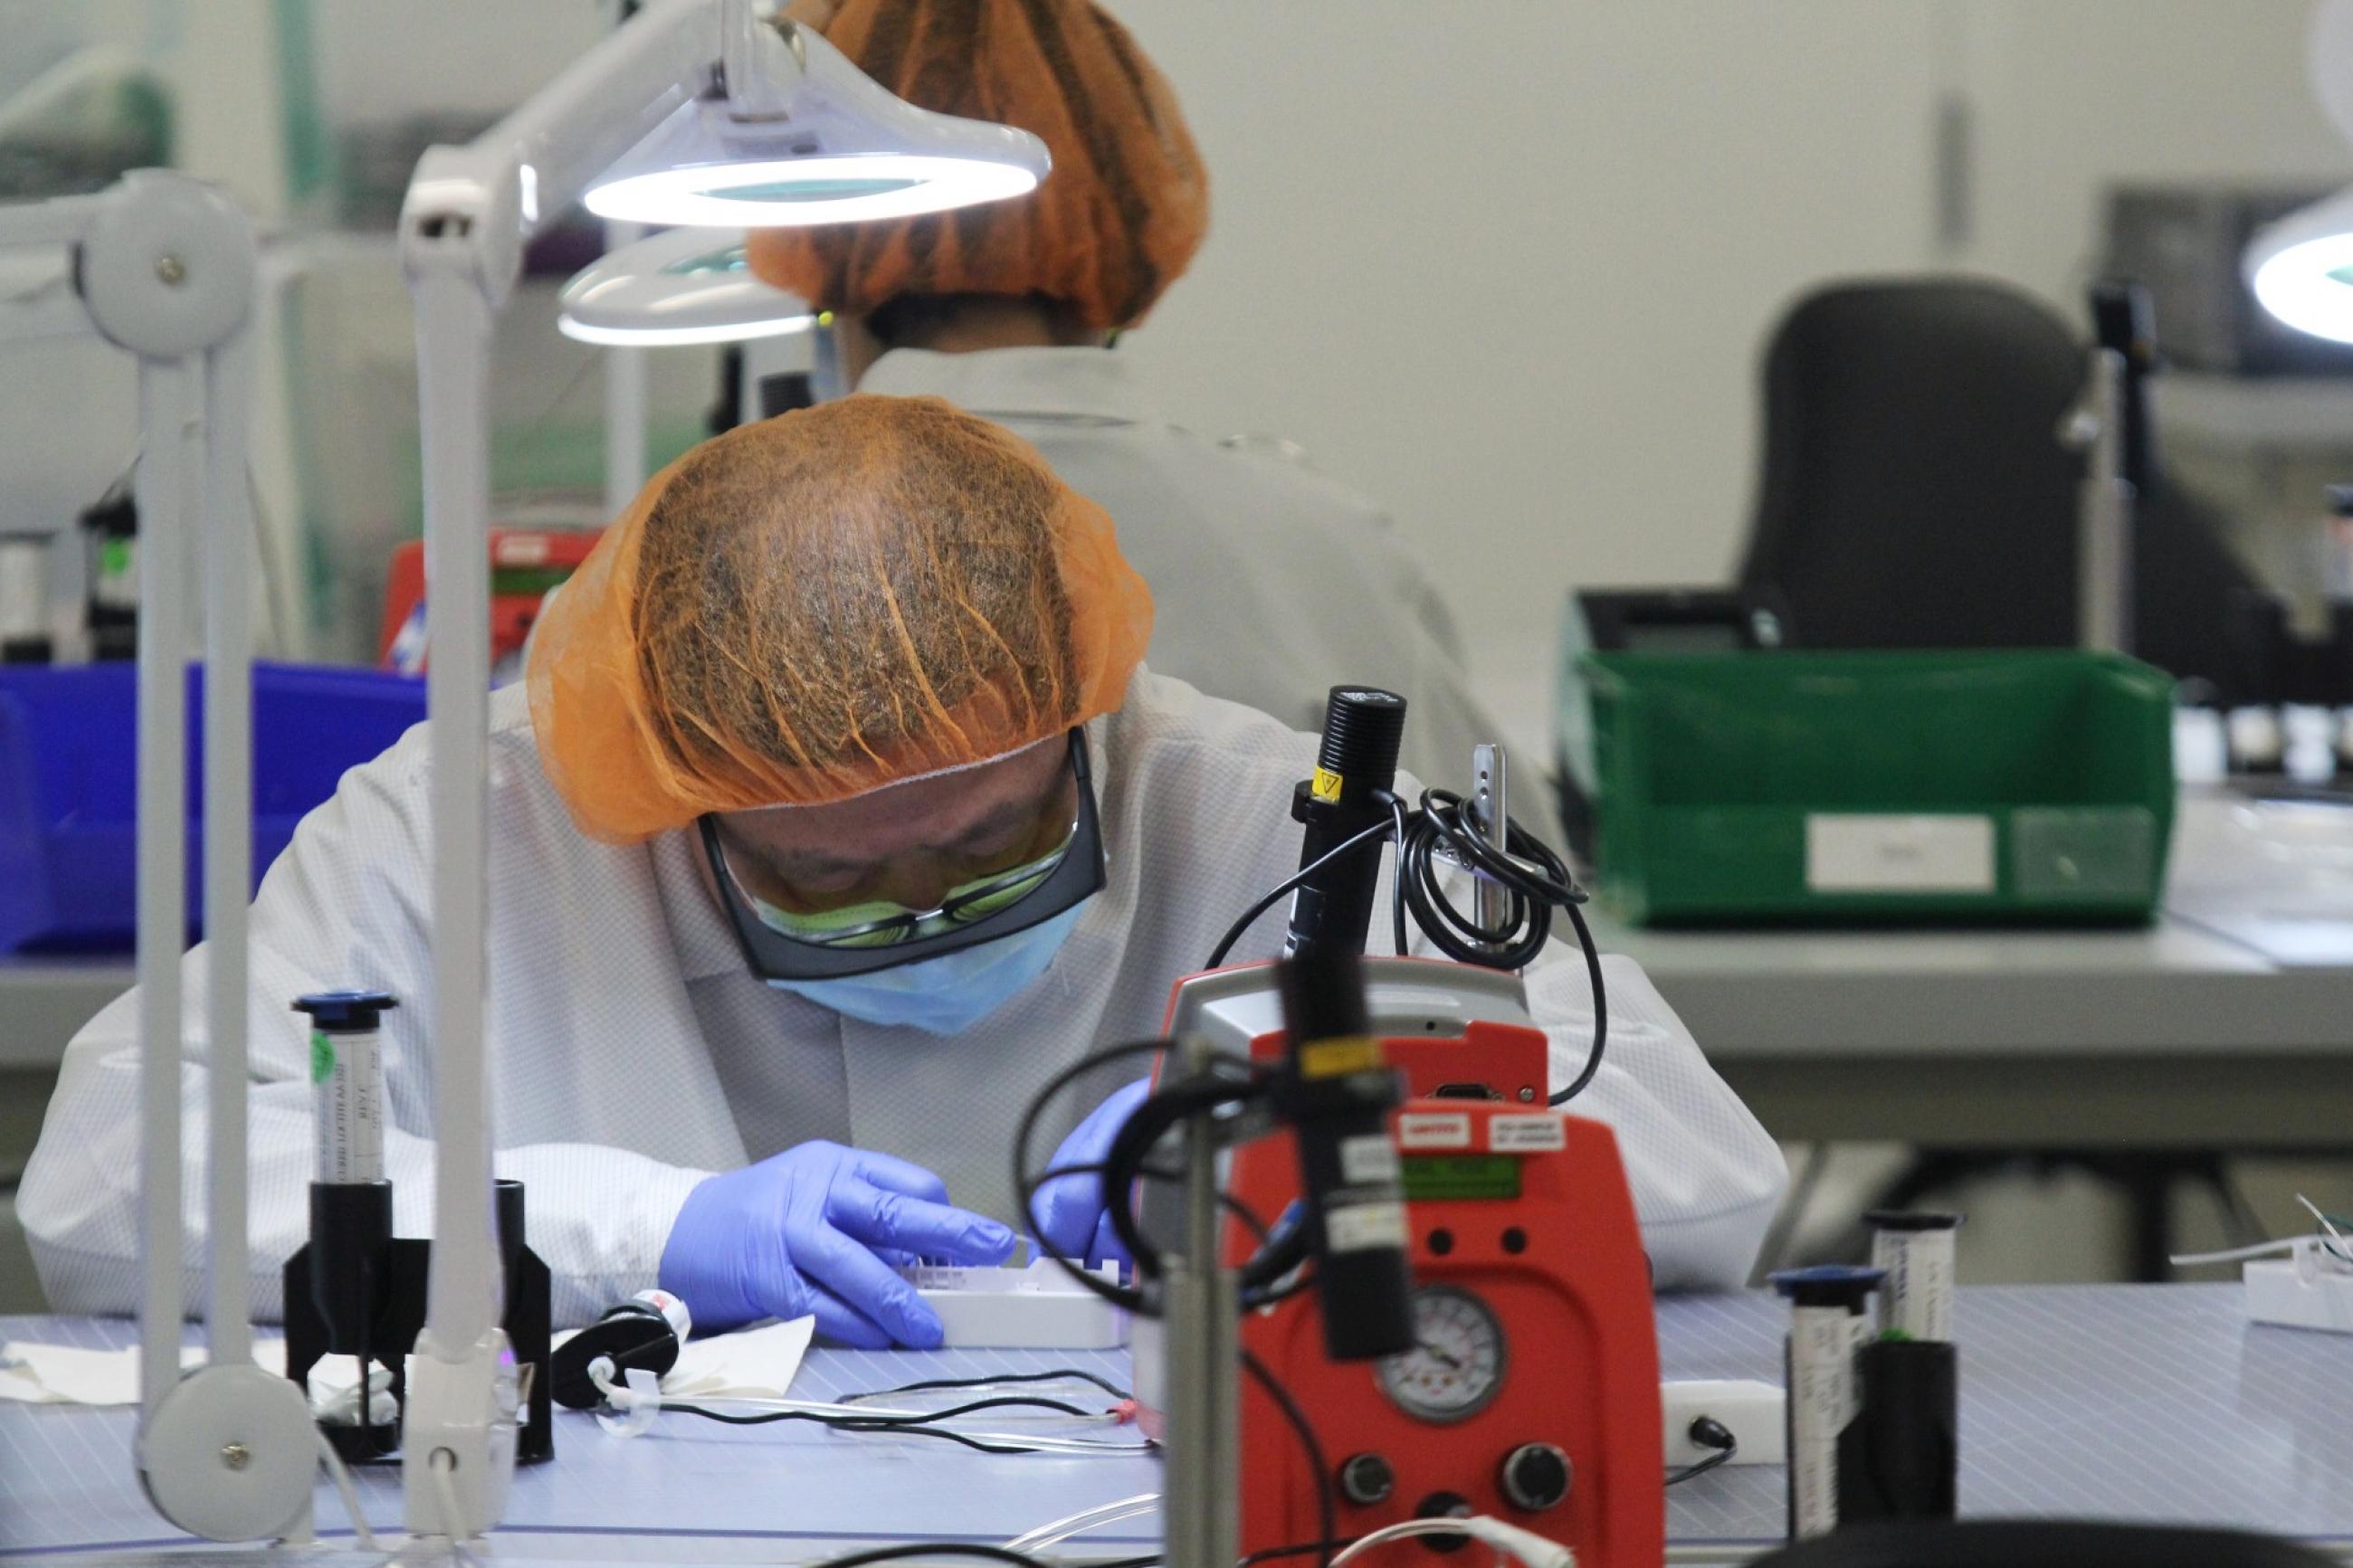 A worker assembles parts of a COVID-19 test kit made by Visby Medical at the kit maker's lab in San Jose, California, U.S., August 28, 2020.